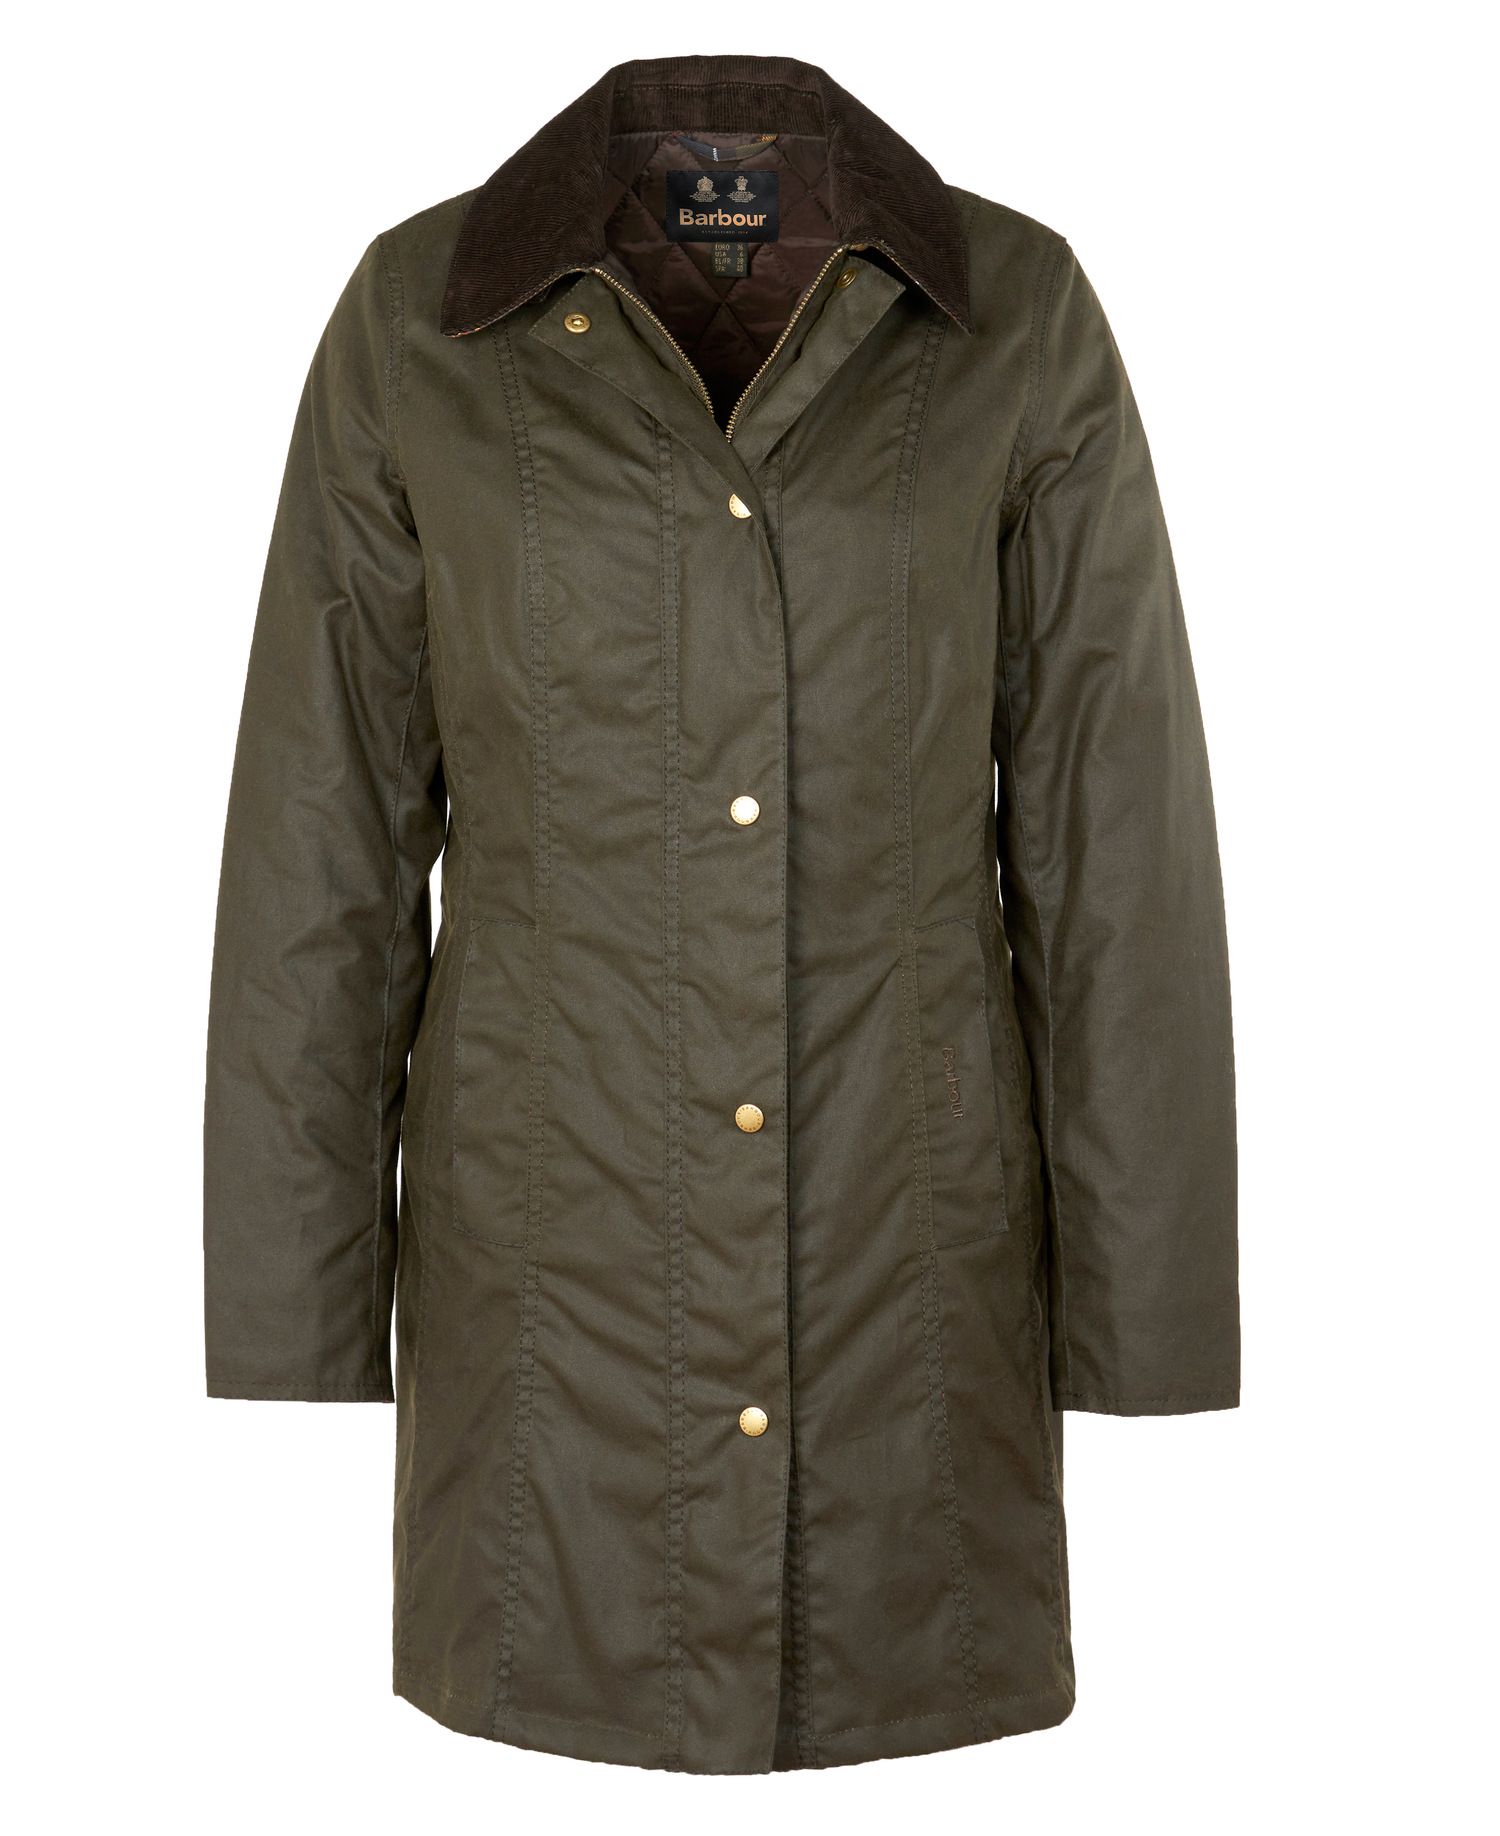 Barbour Belsay Waxed Cotton Jacket in Green | Barbour